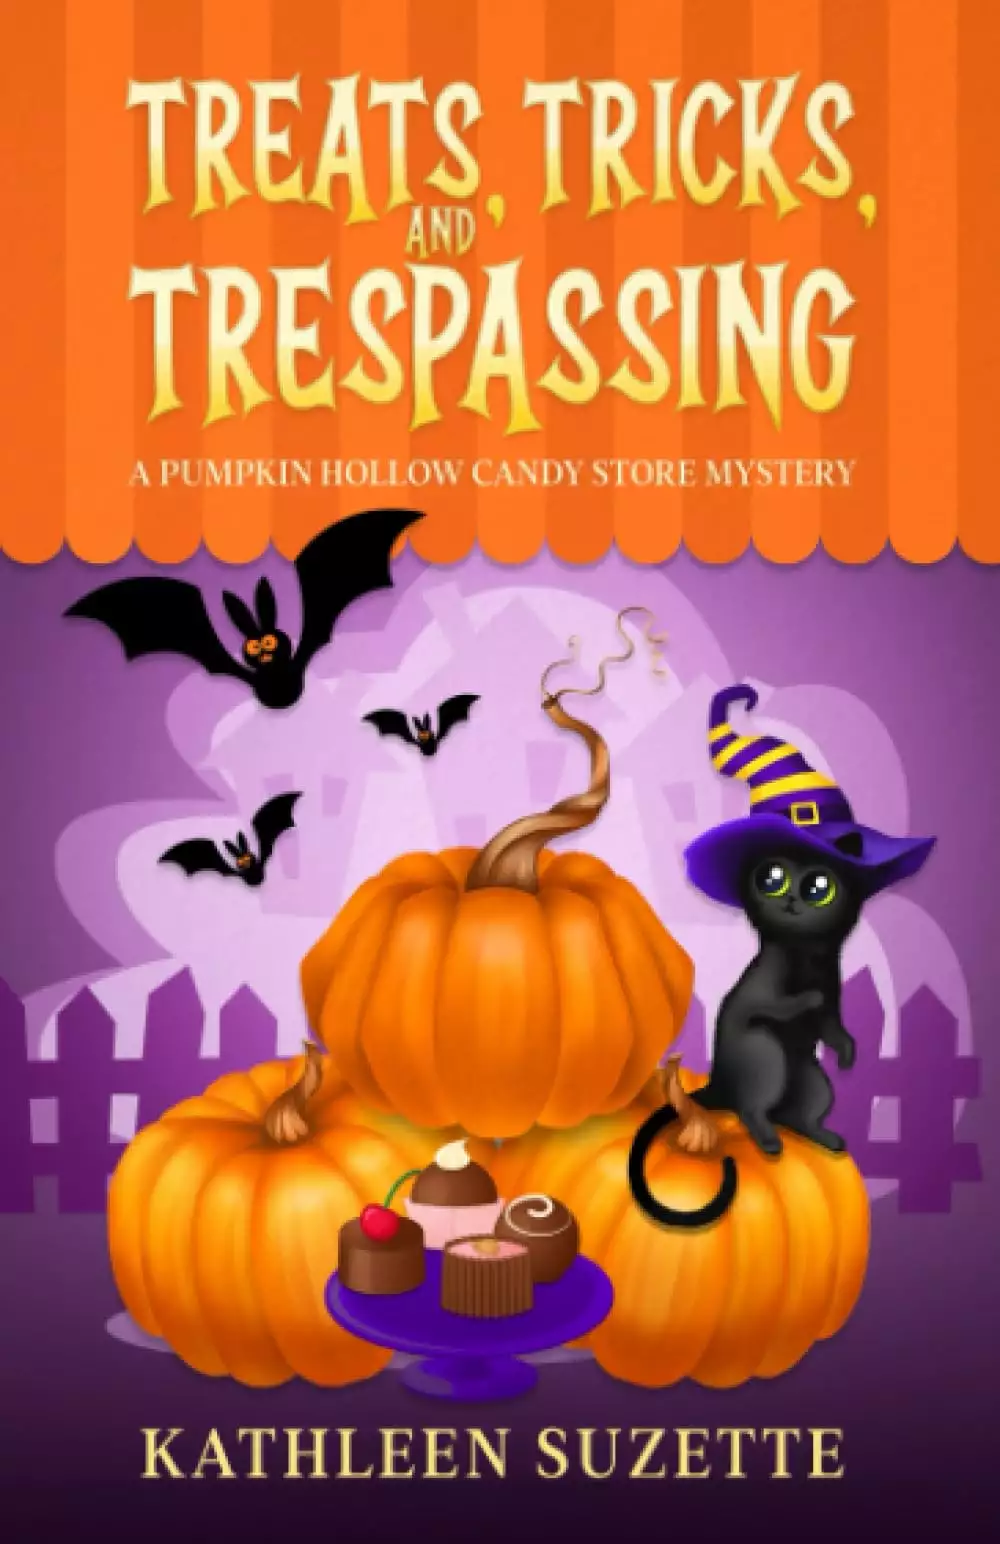 Treats, Tricks, and Trespassing: A Pumpkin Hollow Candy Store Mystery